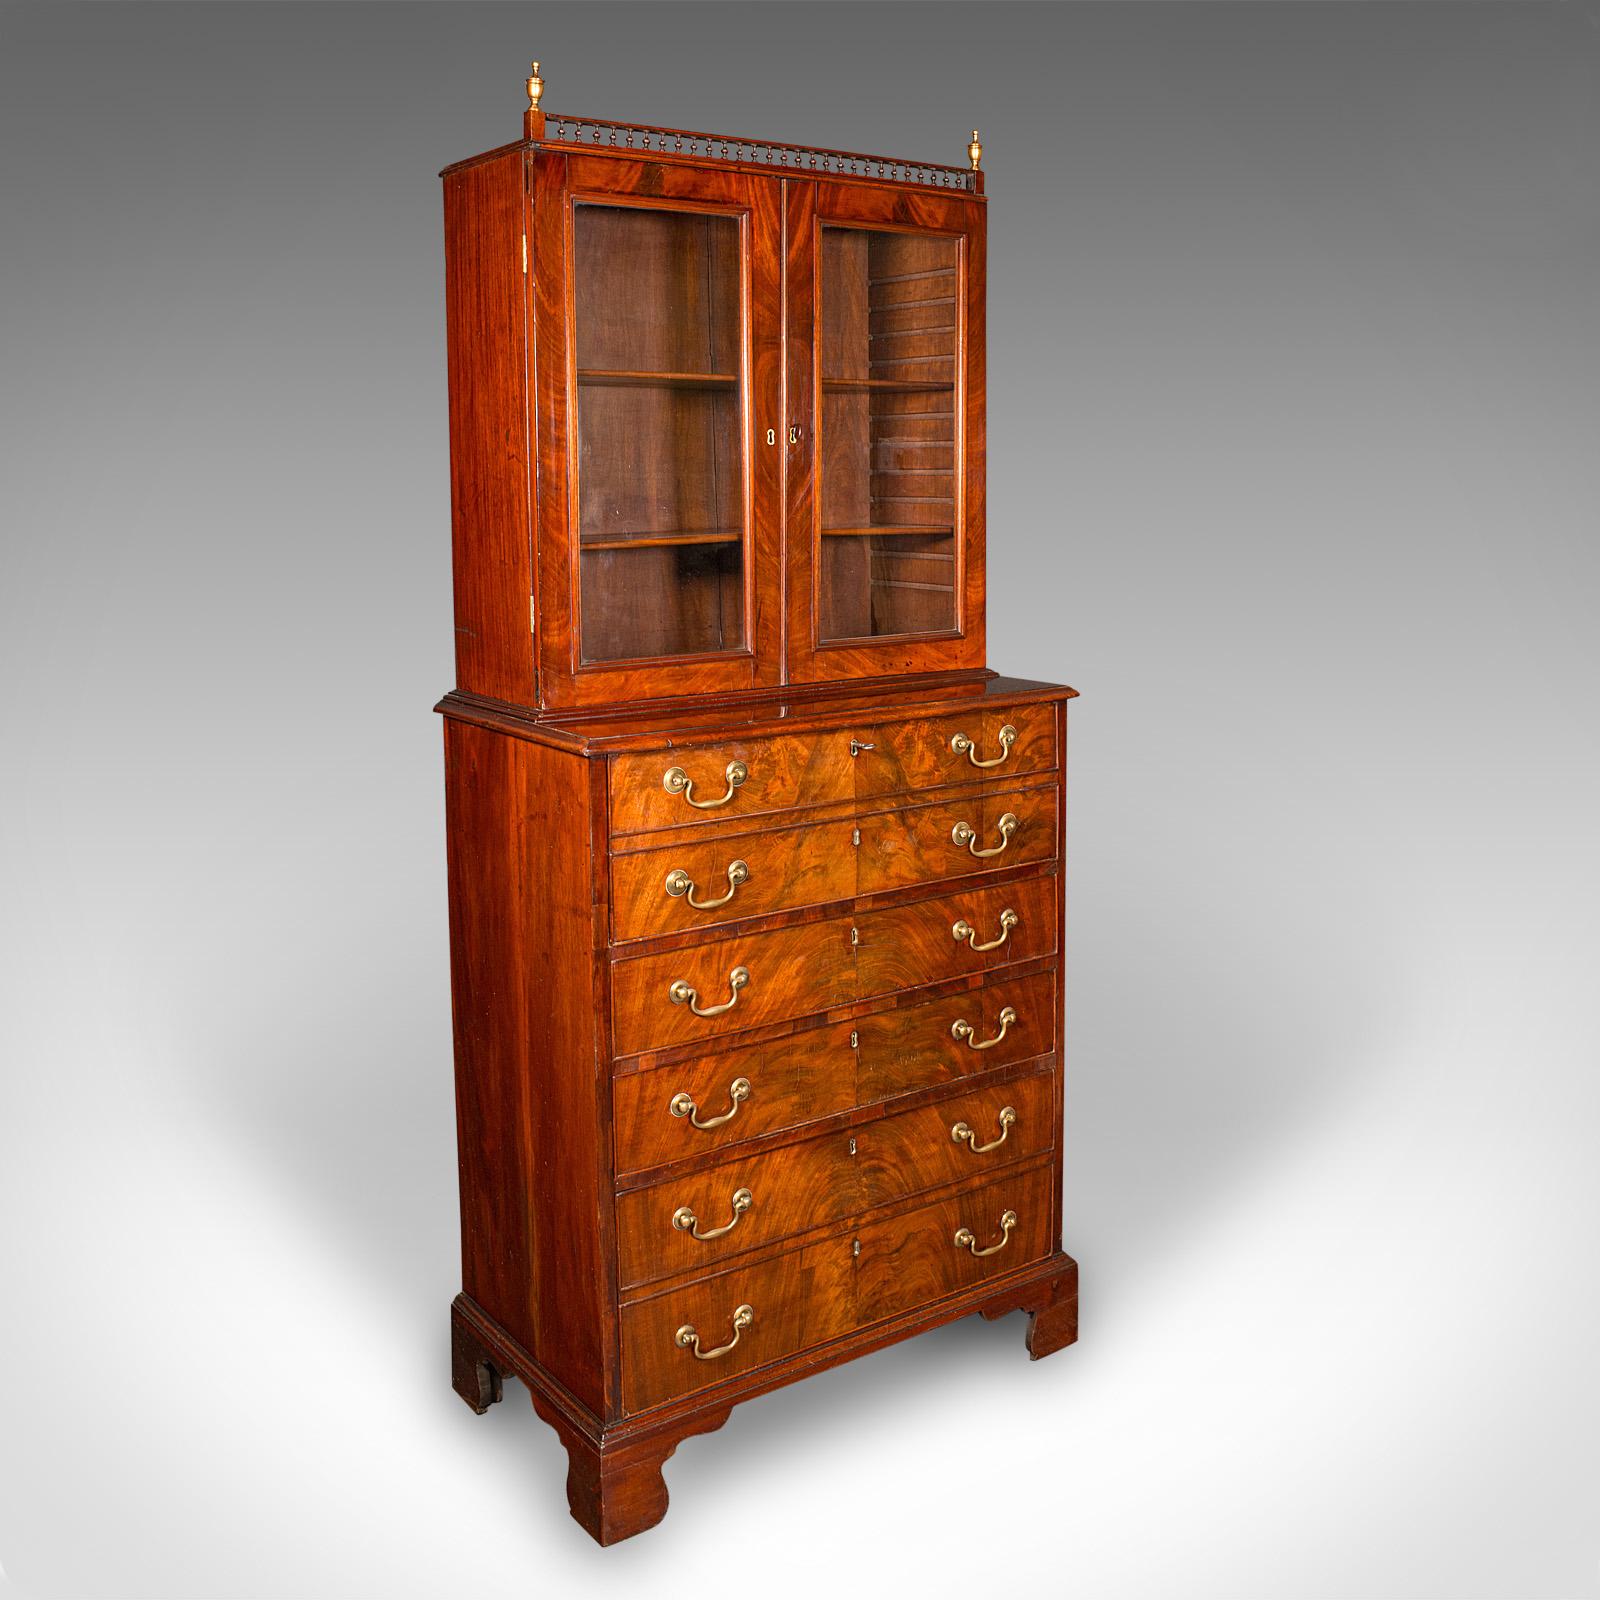 This is an antique author's chest. An English, flame mahogany breakfront secretaire cabinet, dating to the Georgian period, circa 1780.

Beautifully alluring cabinetry, with superb colour and of useful proportion
Displaying a desirable aged patina